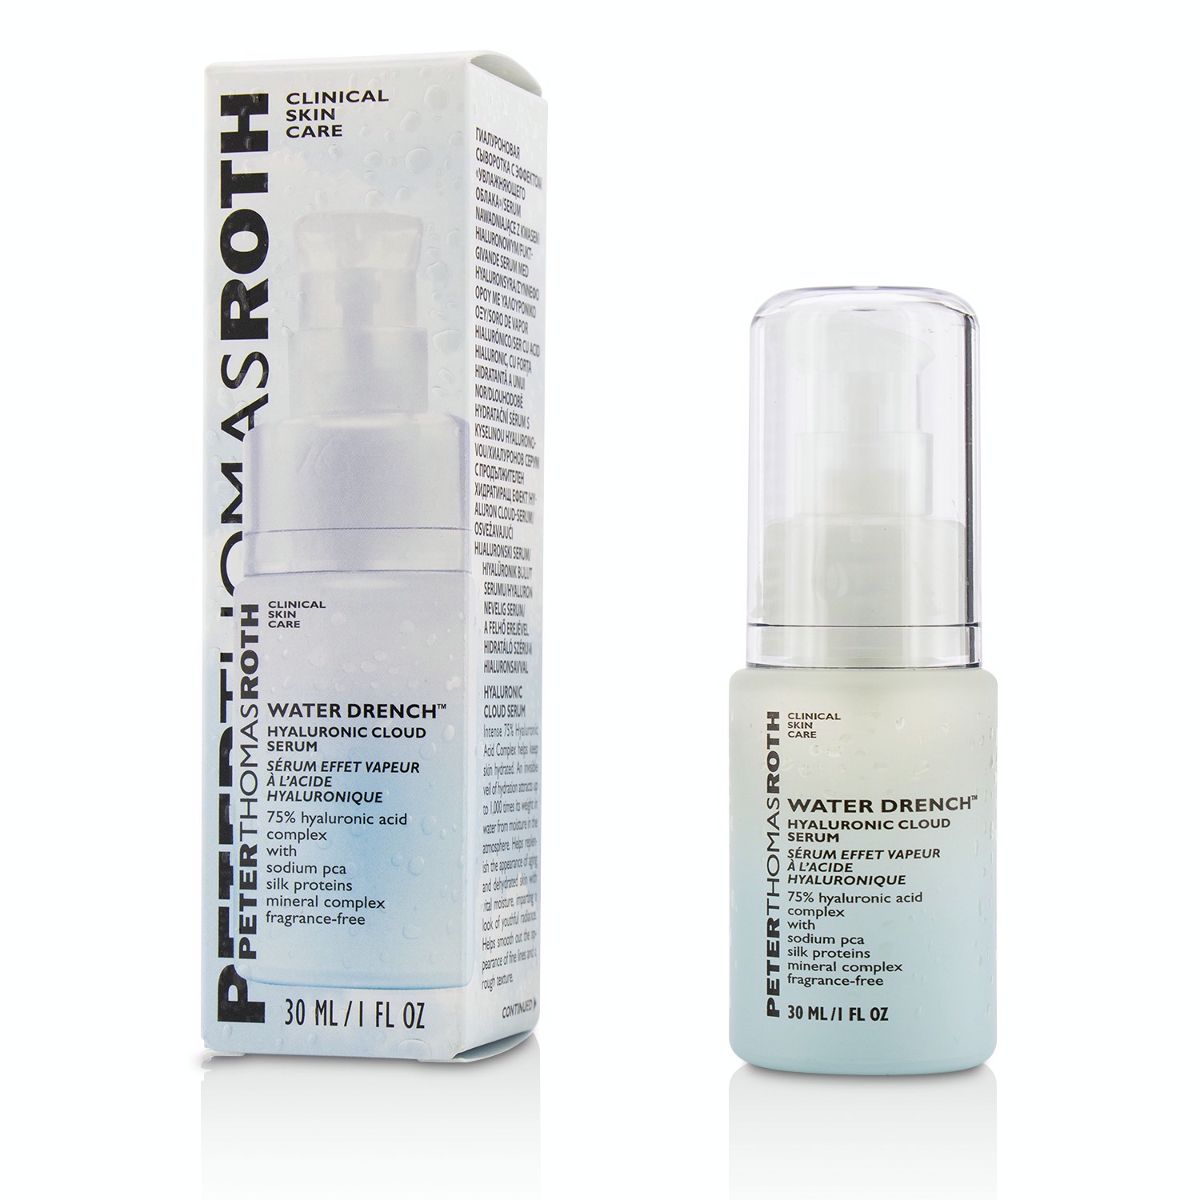 Water Drench Hyaluronic Cloud Serum Peter Thomas Roth Image